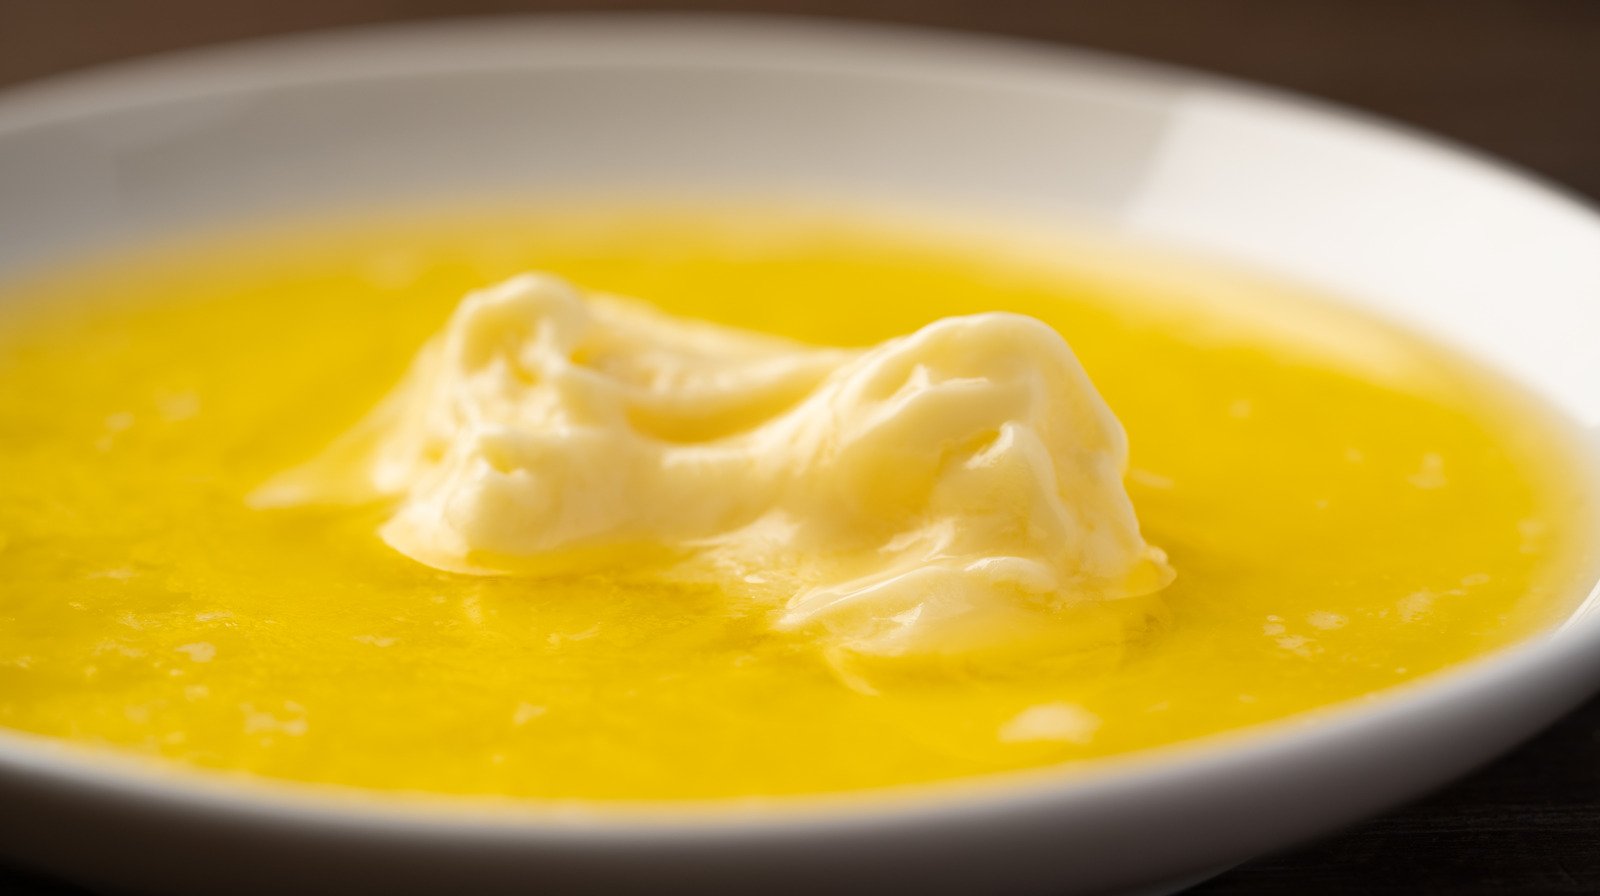 The Genius Tip To Revive Melted Butter Back To Its Solid Form - The Daily Meal